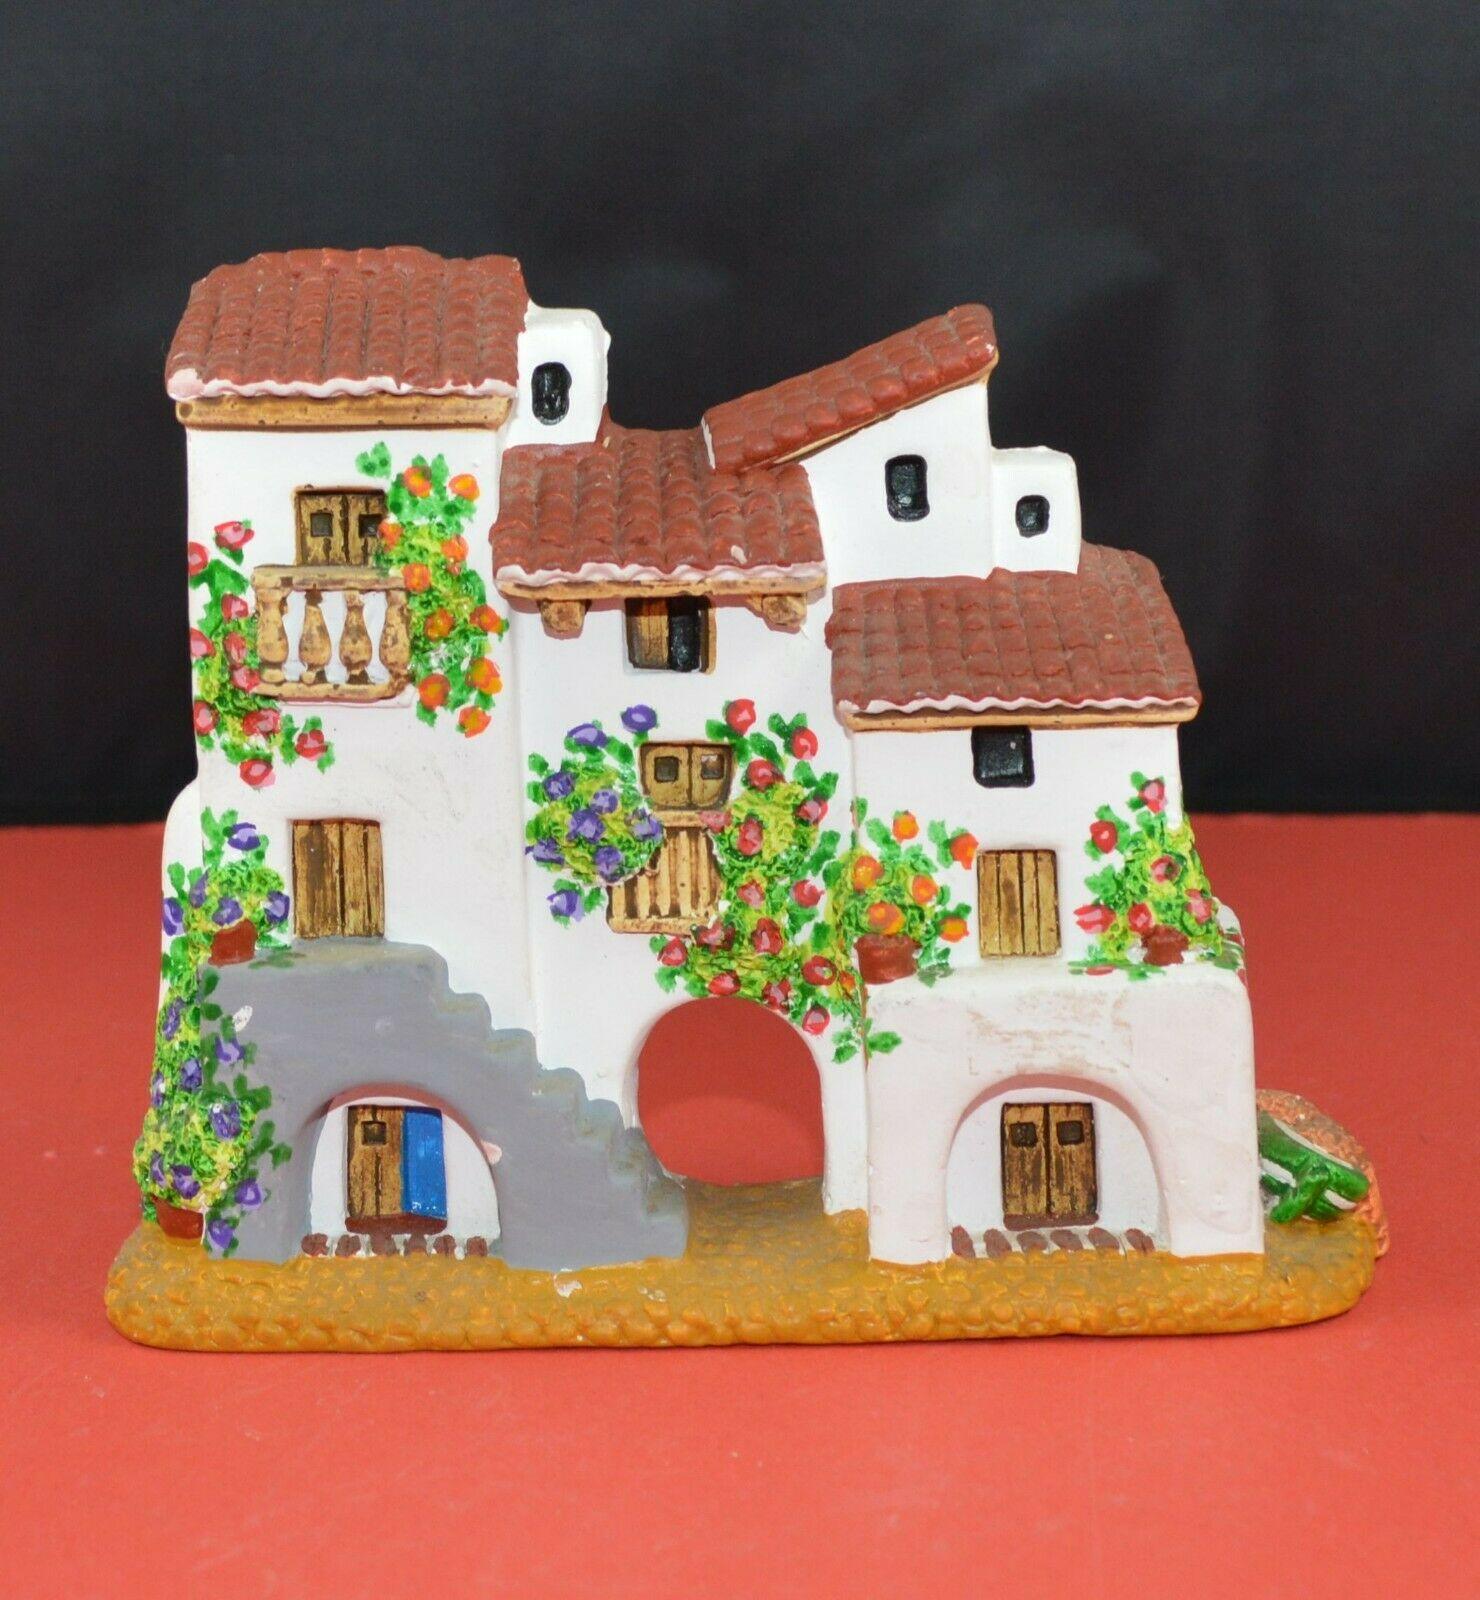 HAND MADE HAND DECORATED HANGING HOUSE DECORATIVE ORNAMENT - TMD167207